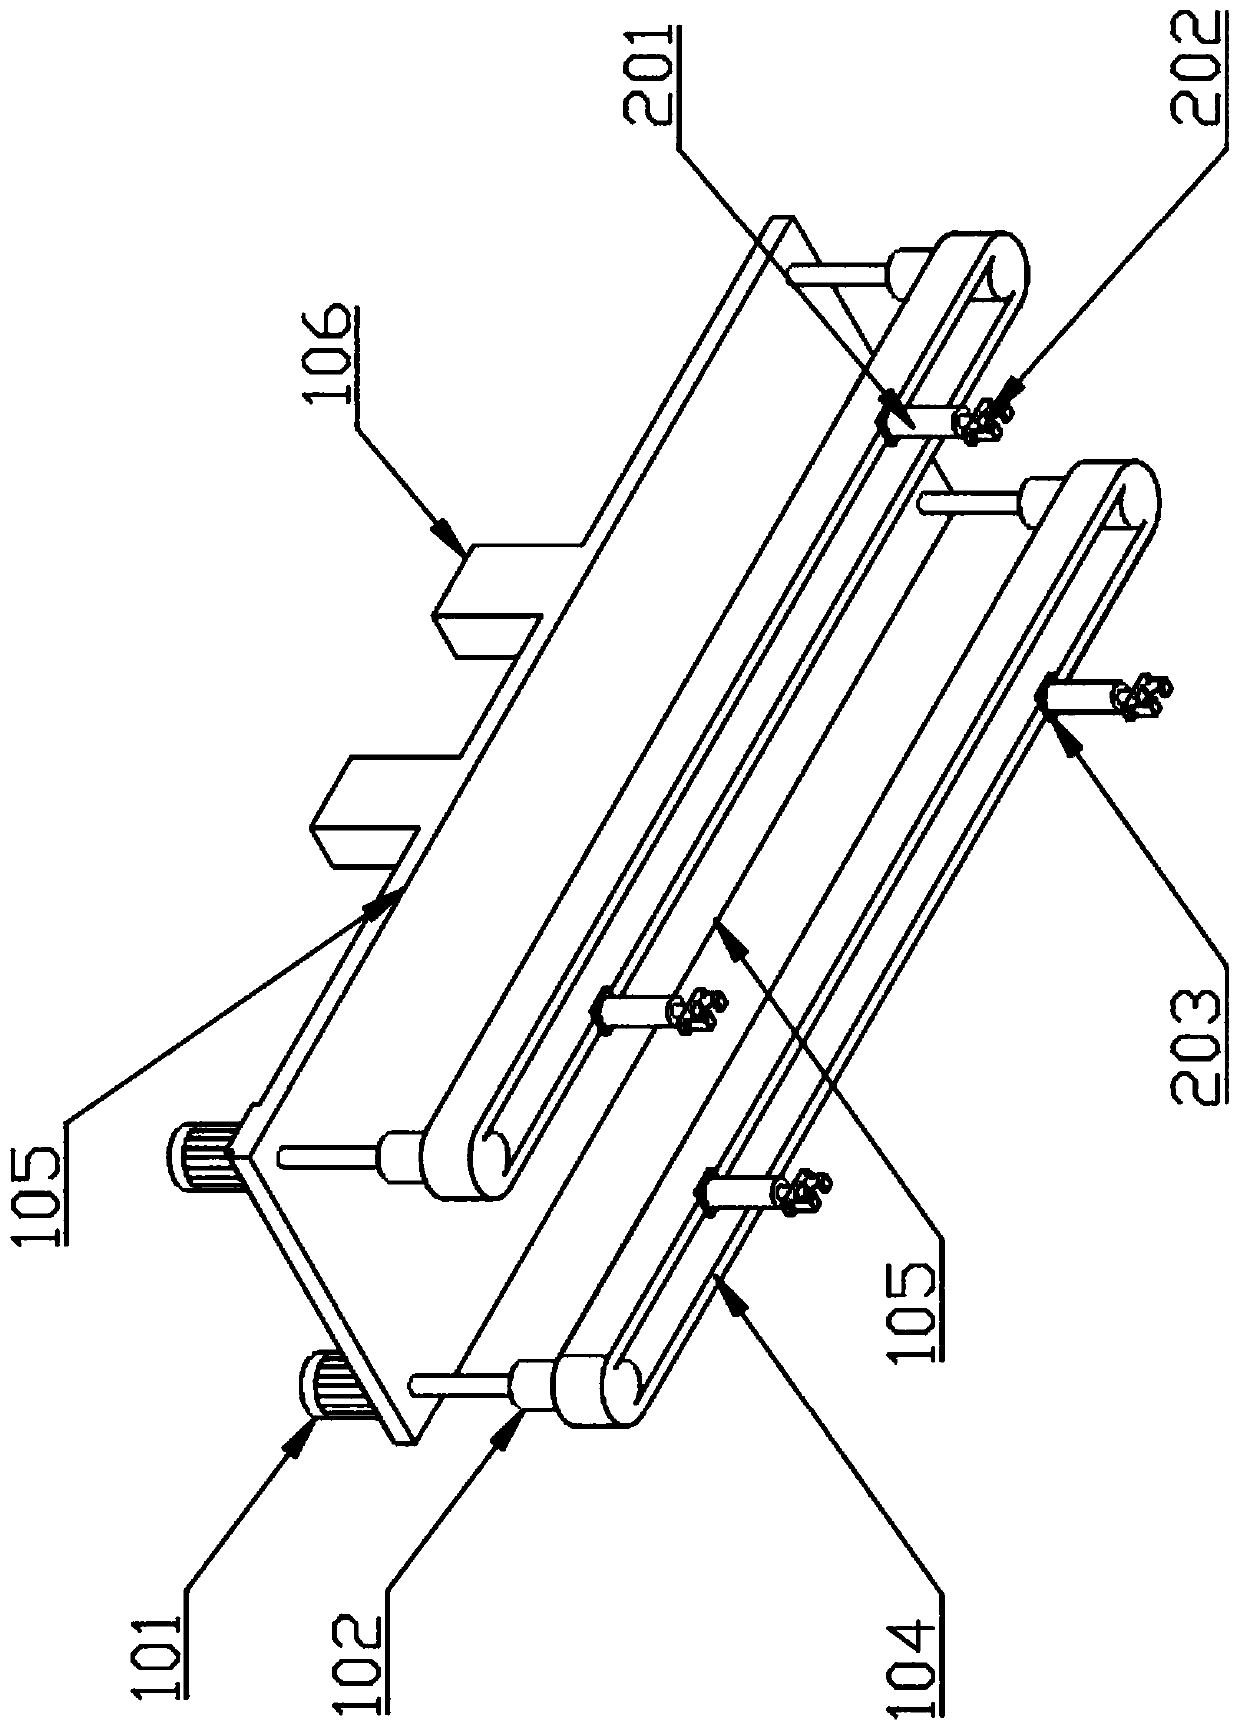 Rubber roller cleaning and laminating device